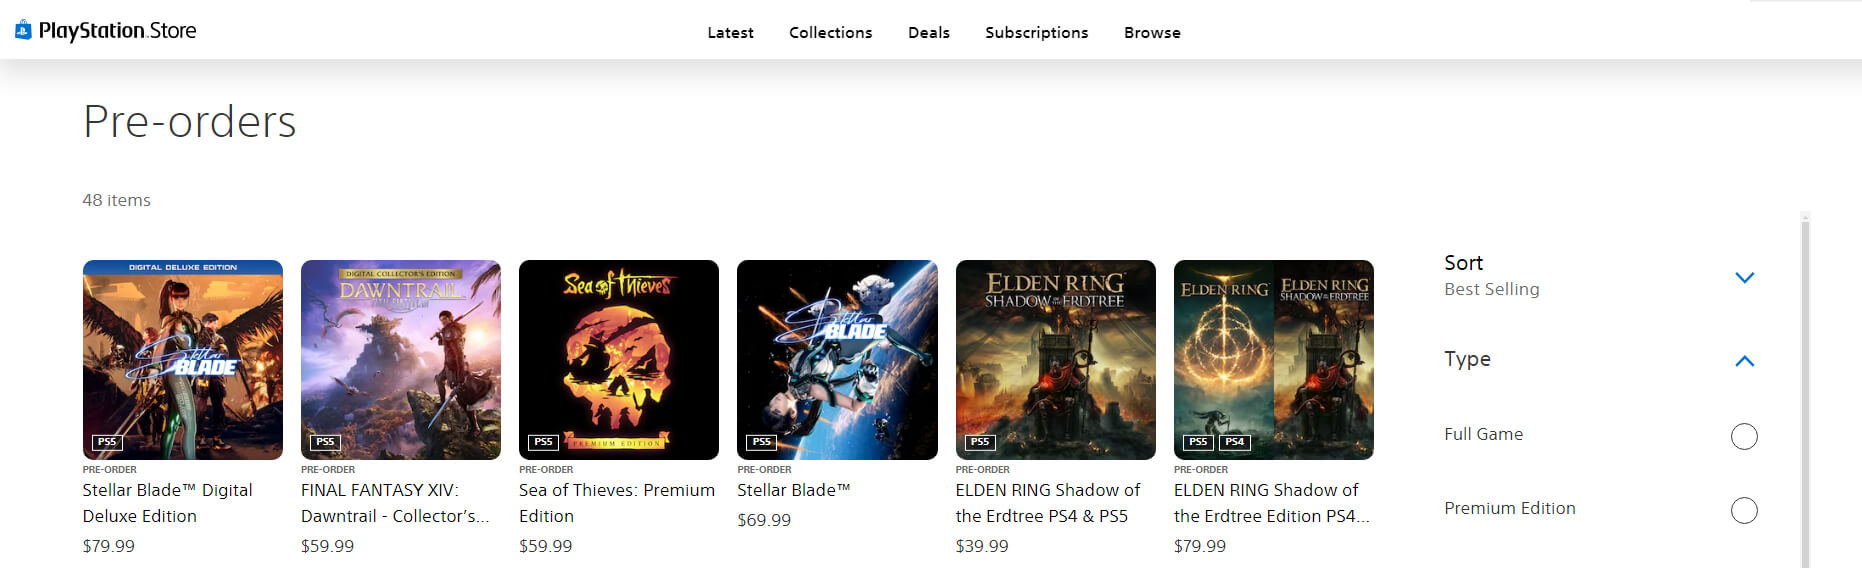 Stellar Blade Reigning Supreme on the PS Store as Well